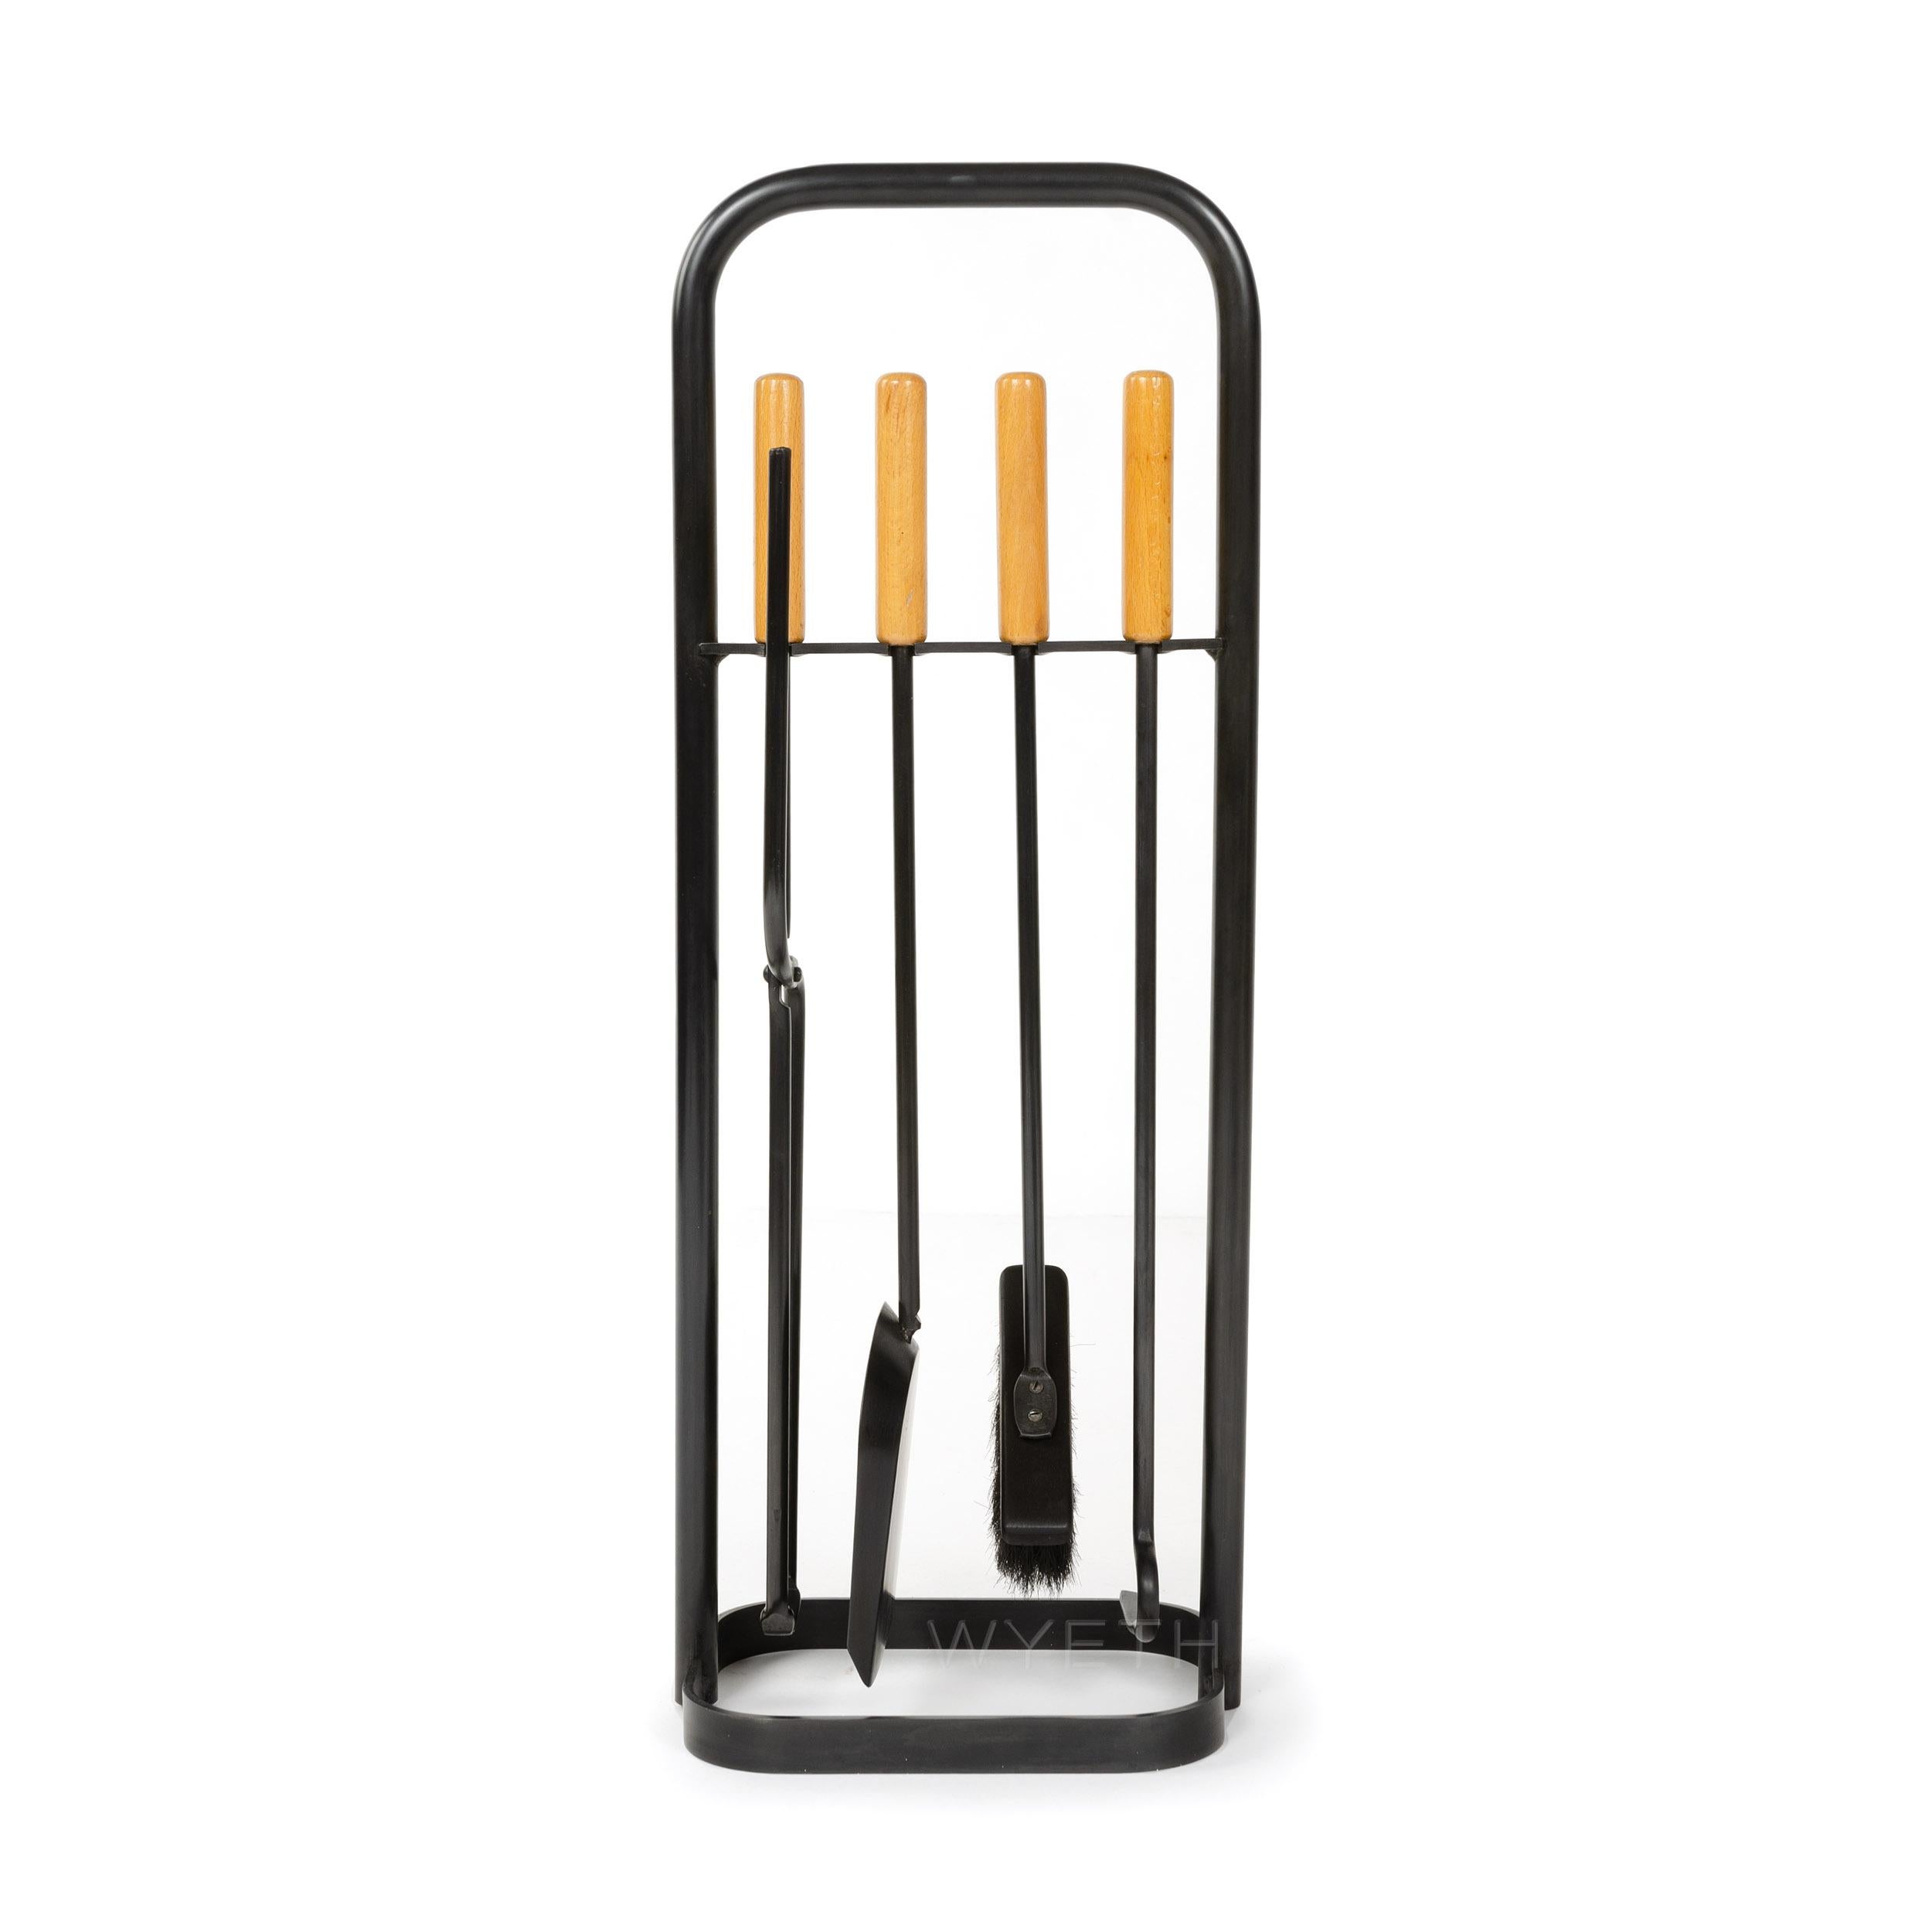 A set of handmade iron fire tools with a patinated steel finish and natural wood handles, on an inline stand with a rectangular base.